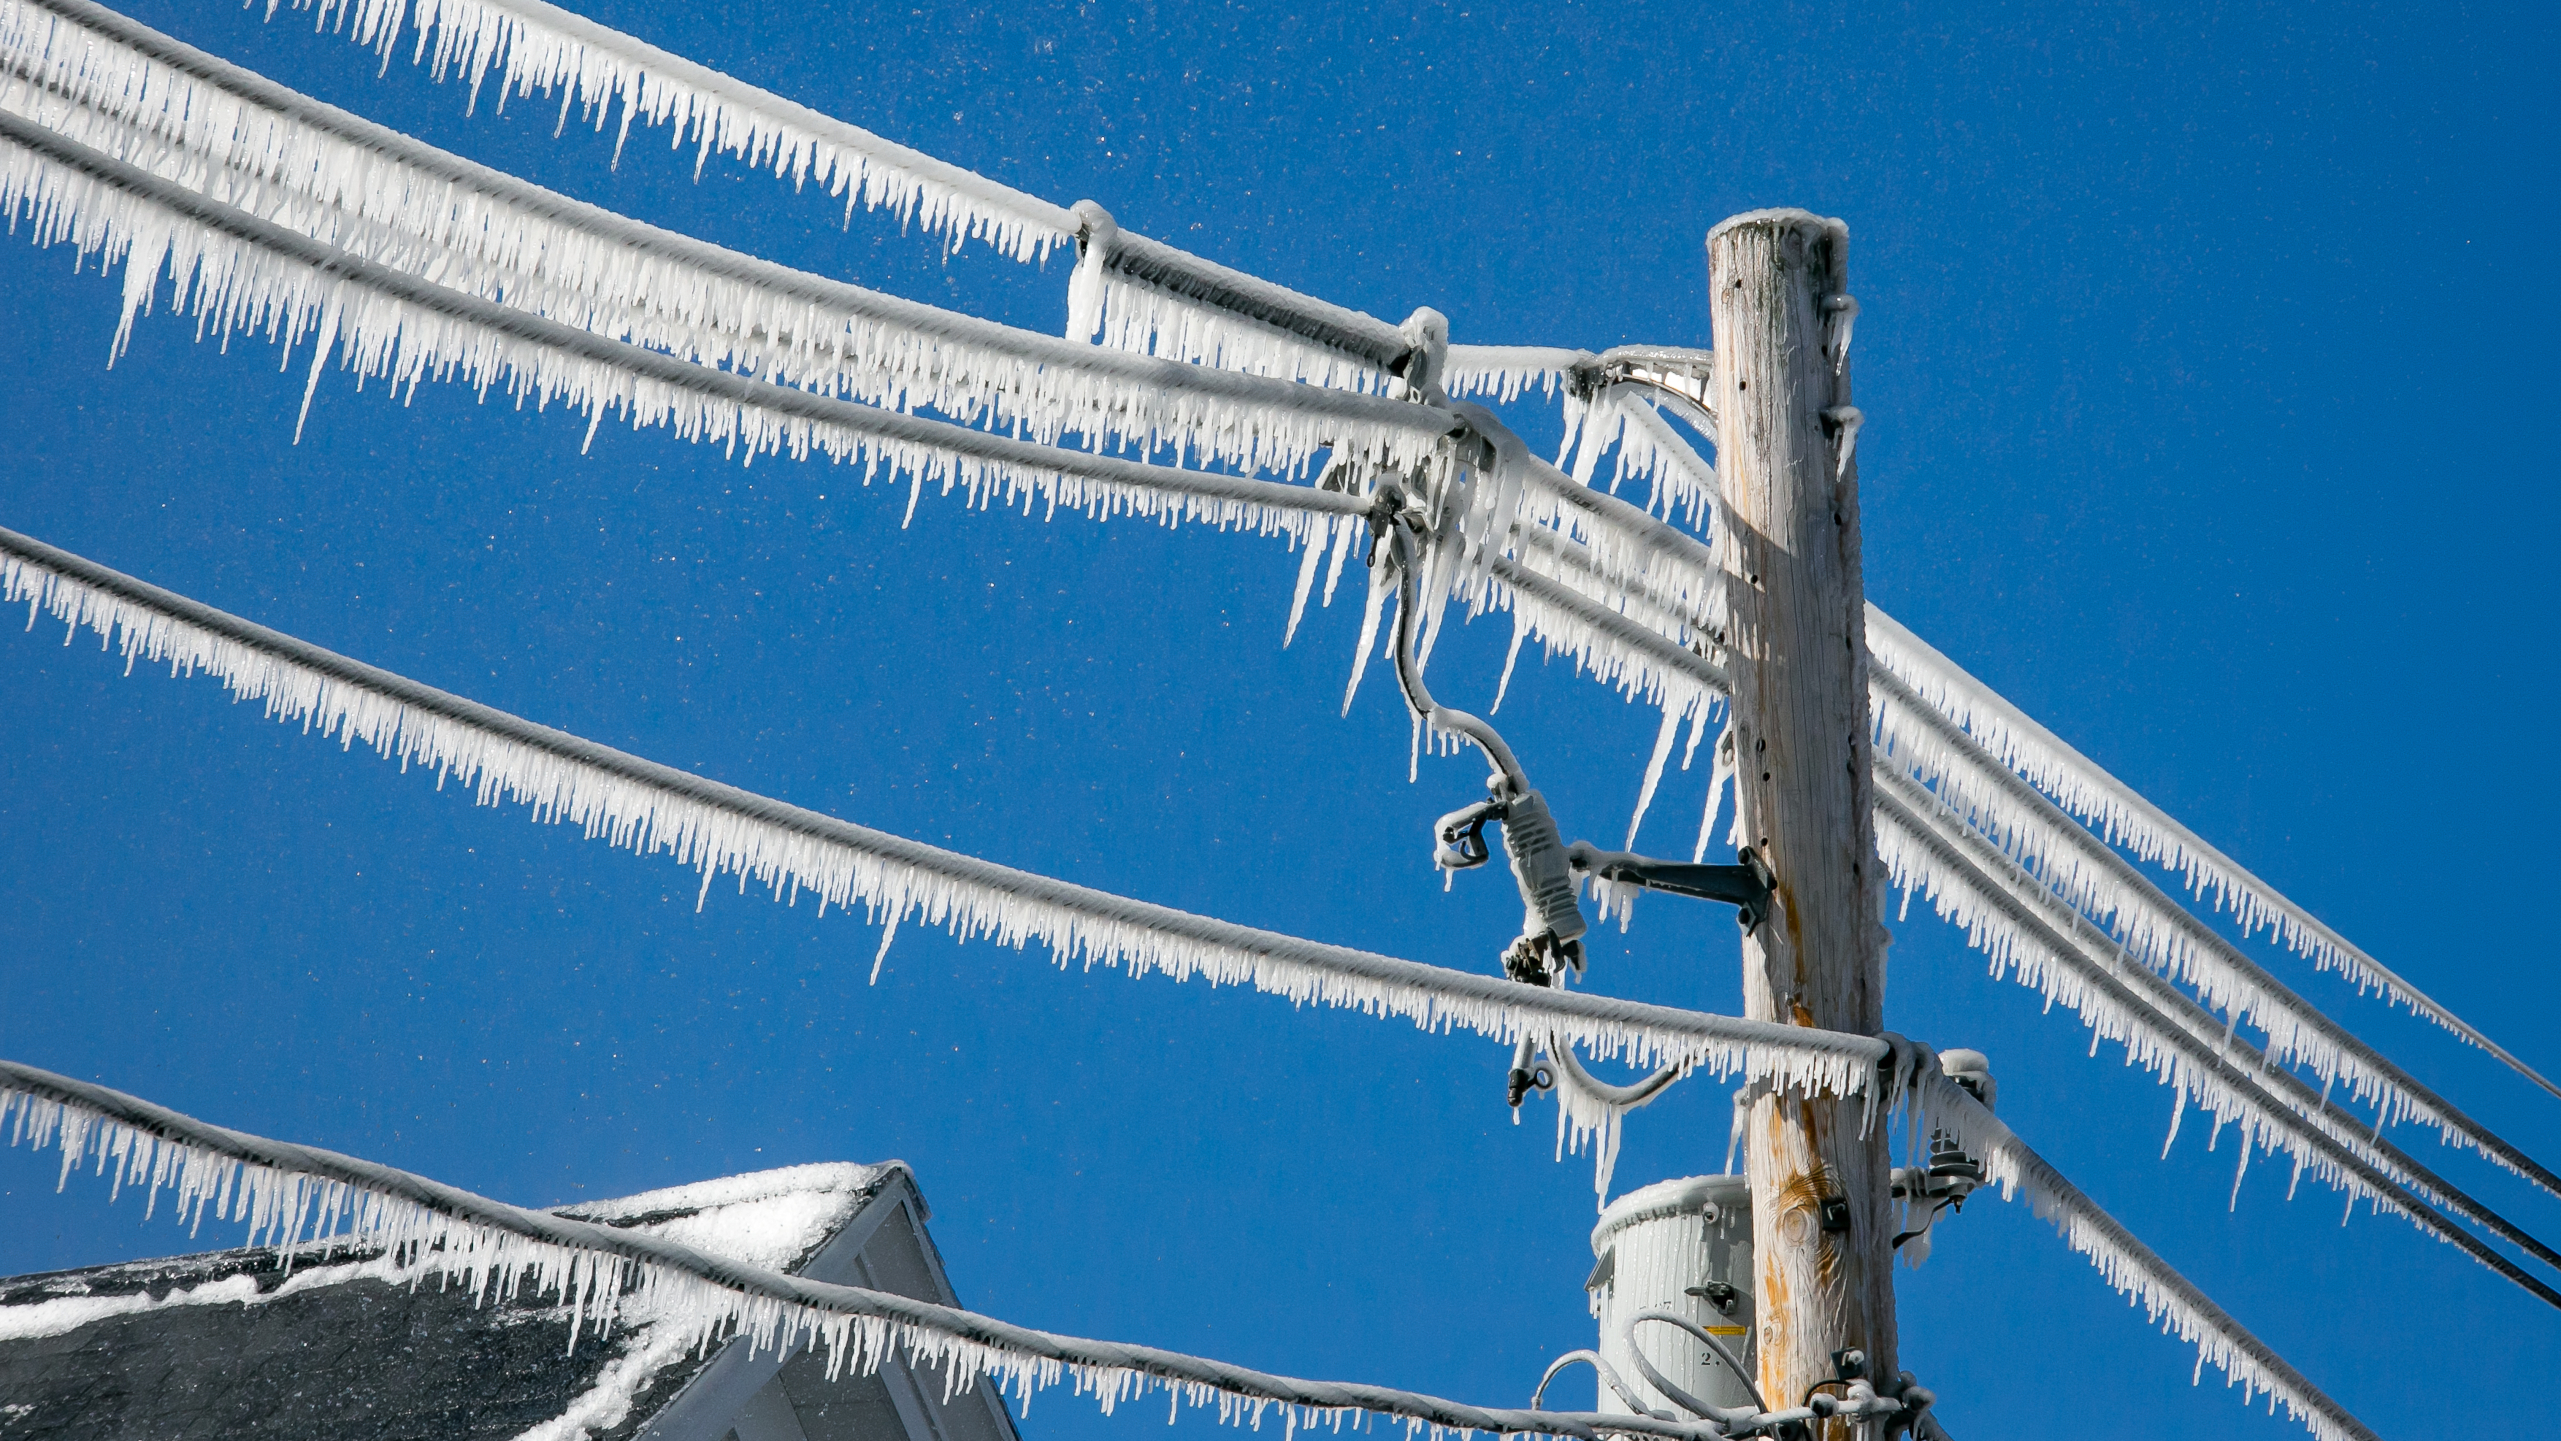 https://firstonsite.com/en-CA/wp-content/uploads/powerlines-that-cause-blackouts-and-power-outages-during-winter.jpg